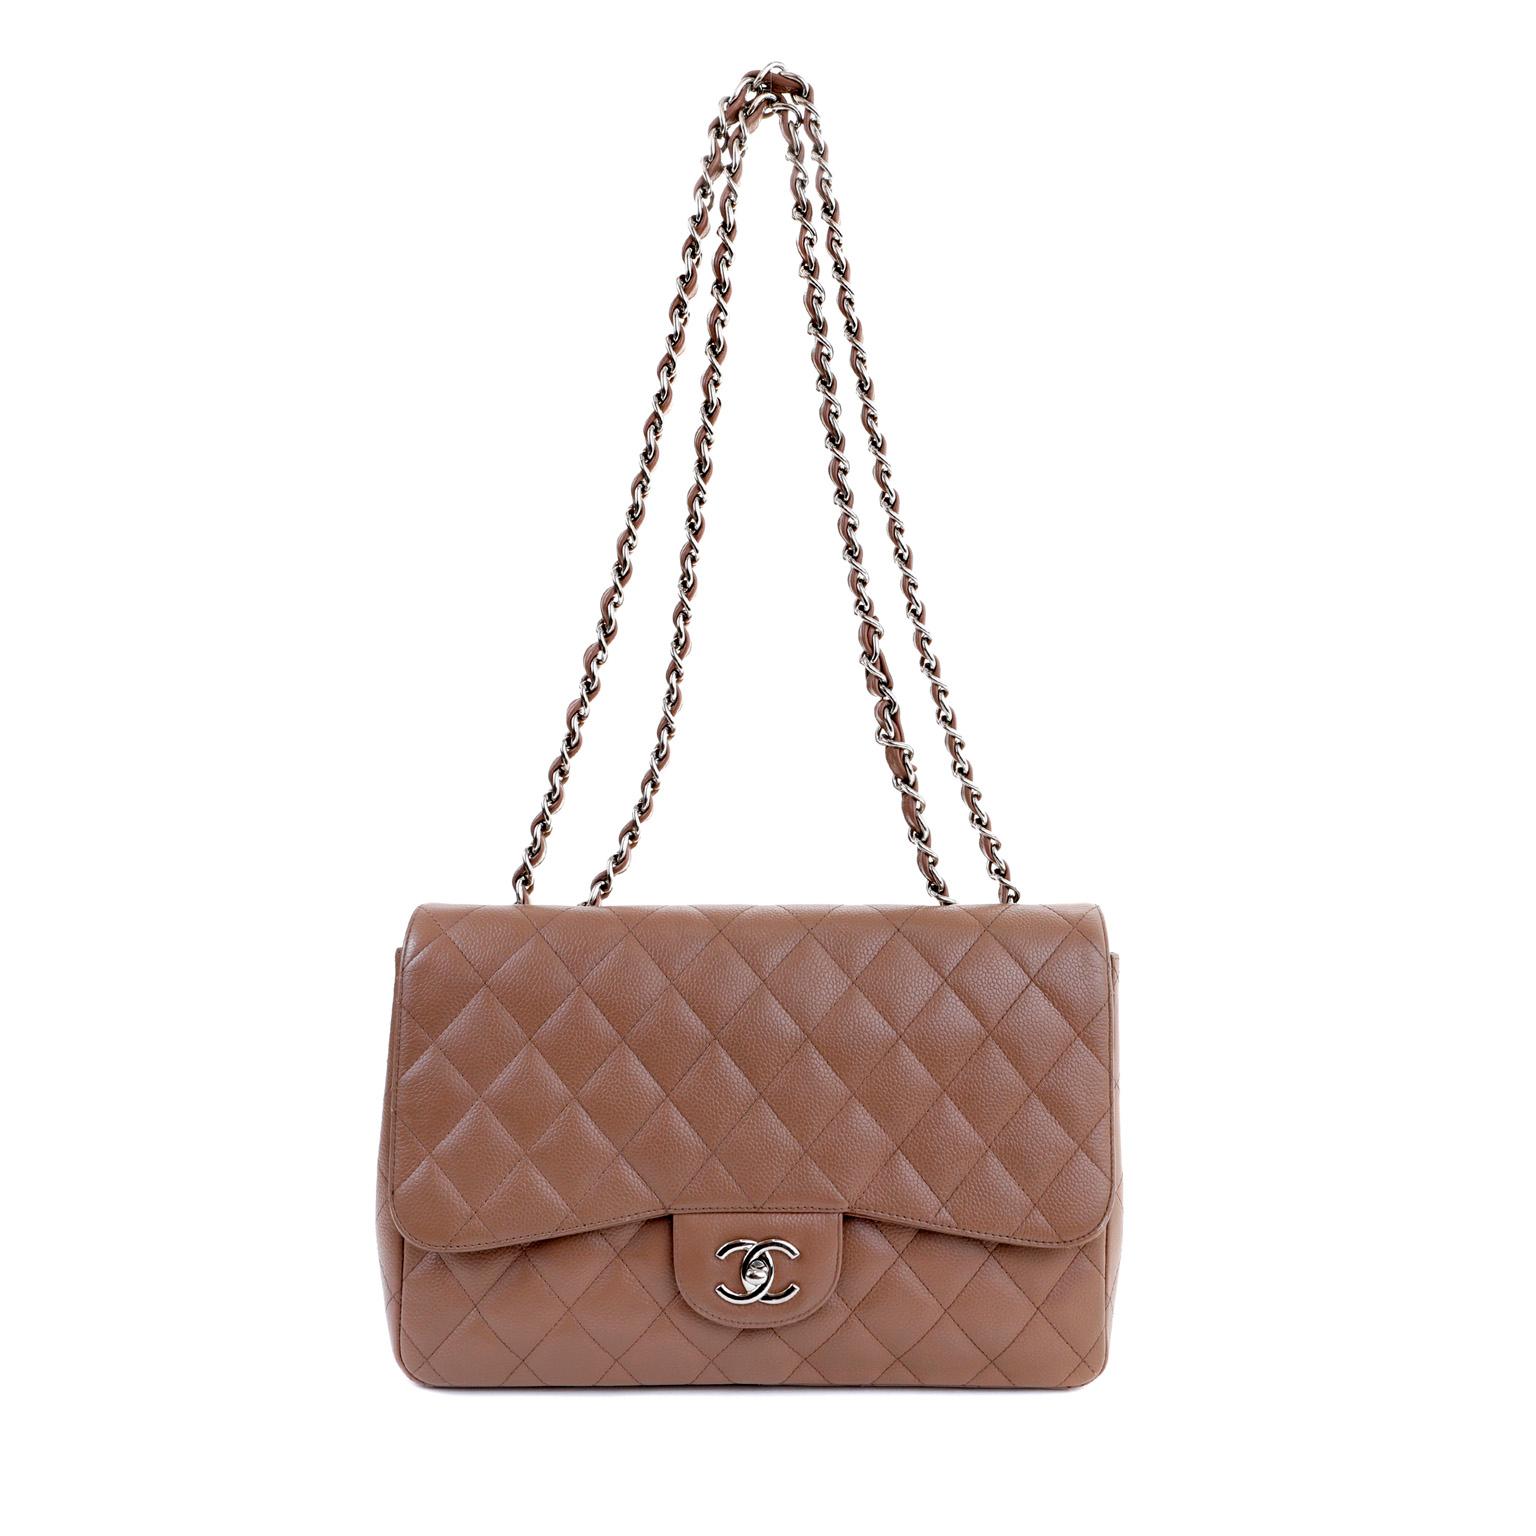 Chanel Caramel Caviar Jumbo Classic Flap Bag  In Excellent Condition For Sale In Palm Beach, FL